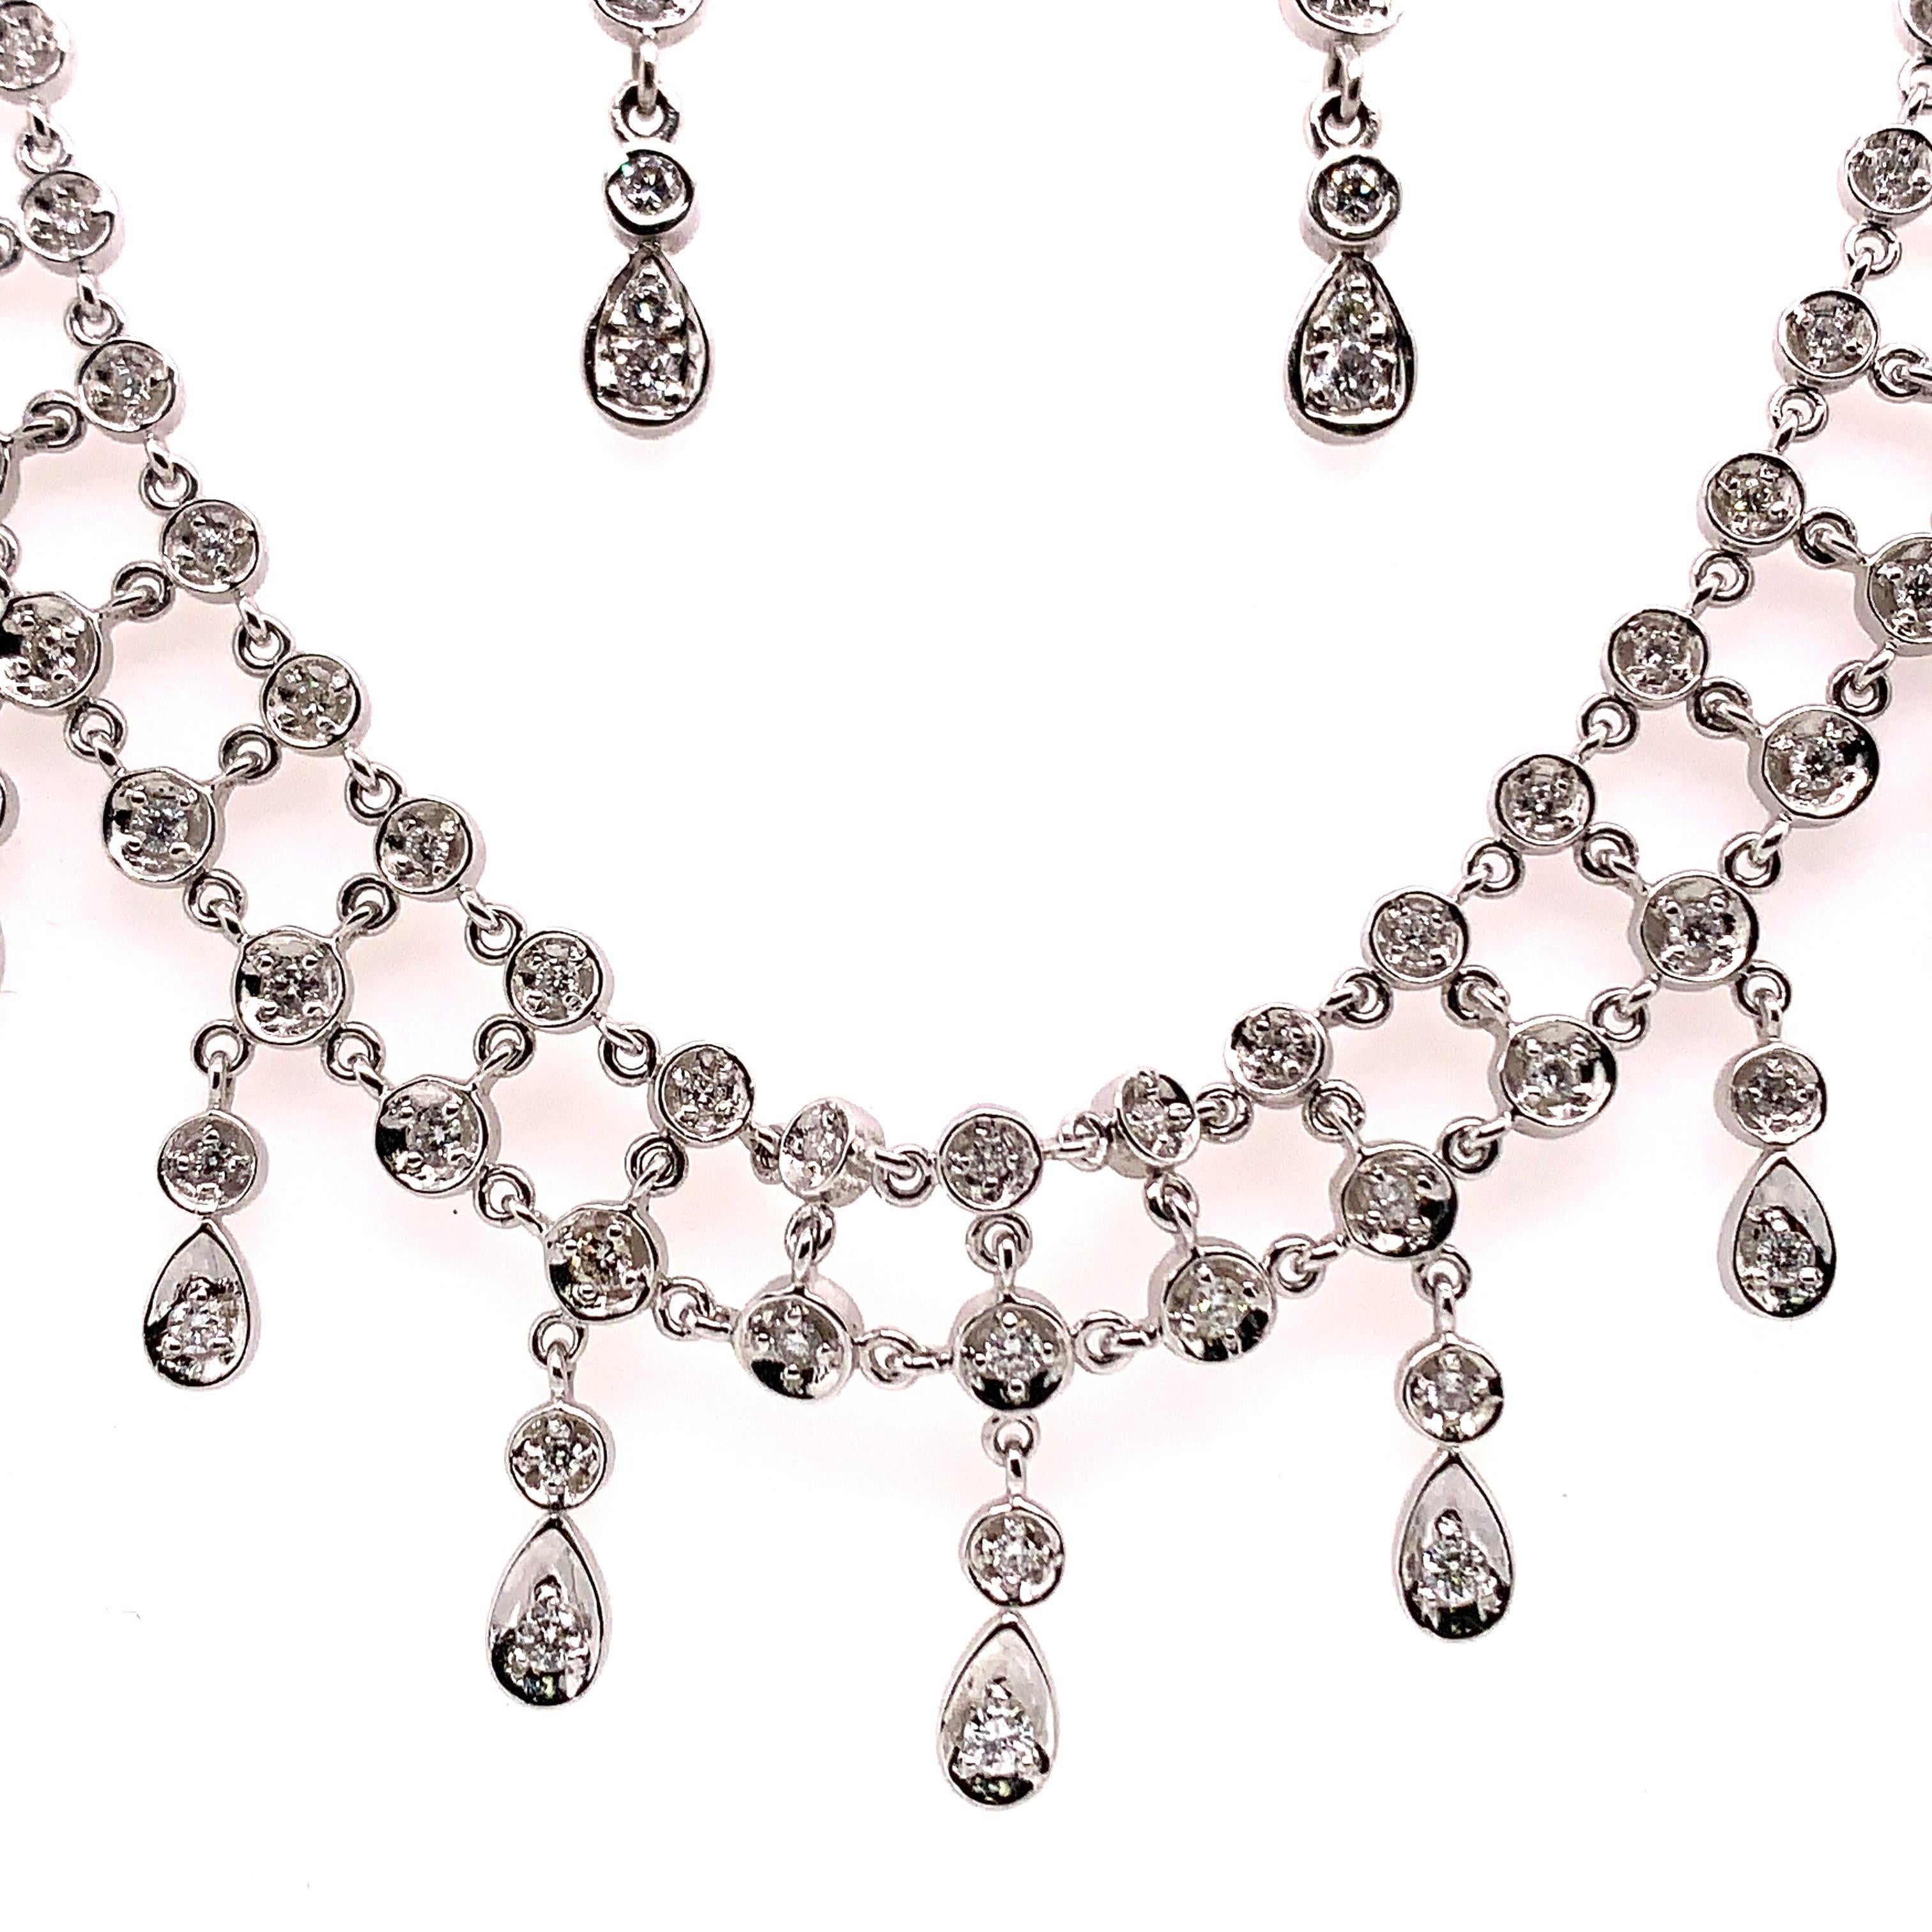 A stunning 3.10 Carat (approximately) White Gold vintage necklace set with 136 natural round brilliant diamonds approximately F-G in color and VS-SI in clarity.

The necklace includes matching diamond drop earrings.

The weight is 44.52 grams. 16